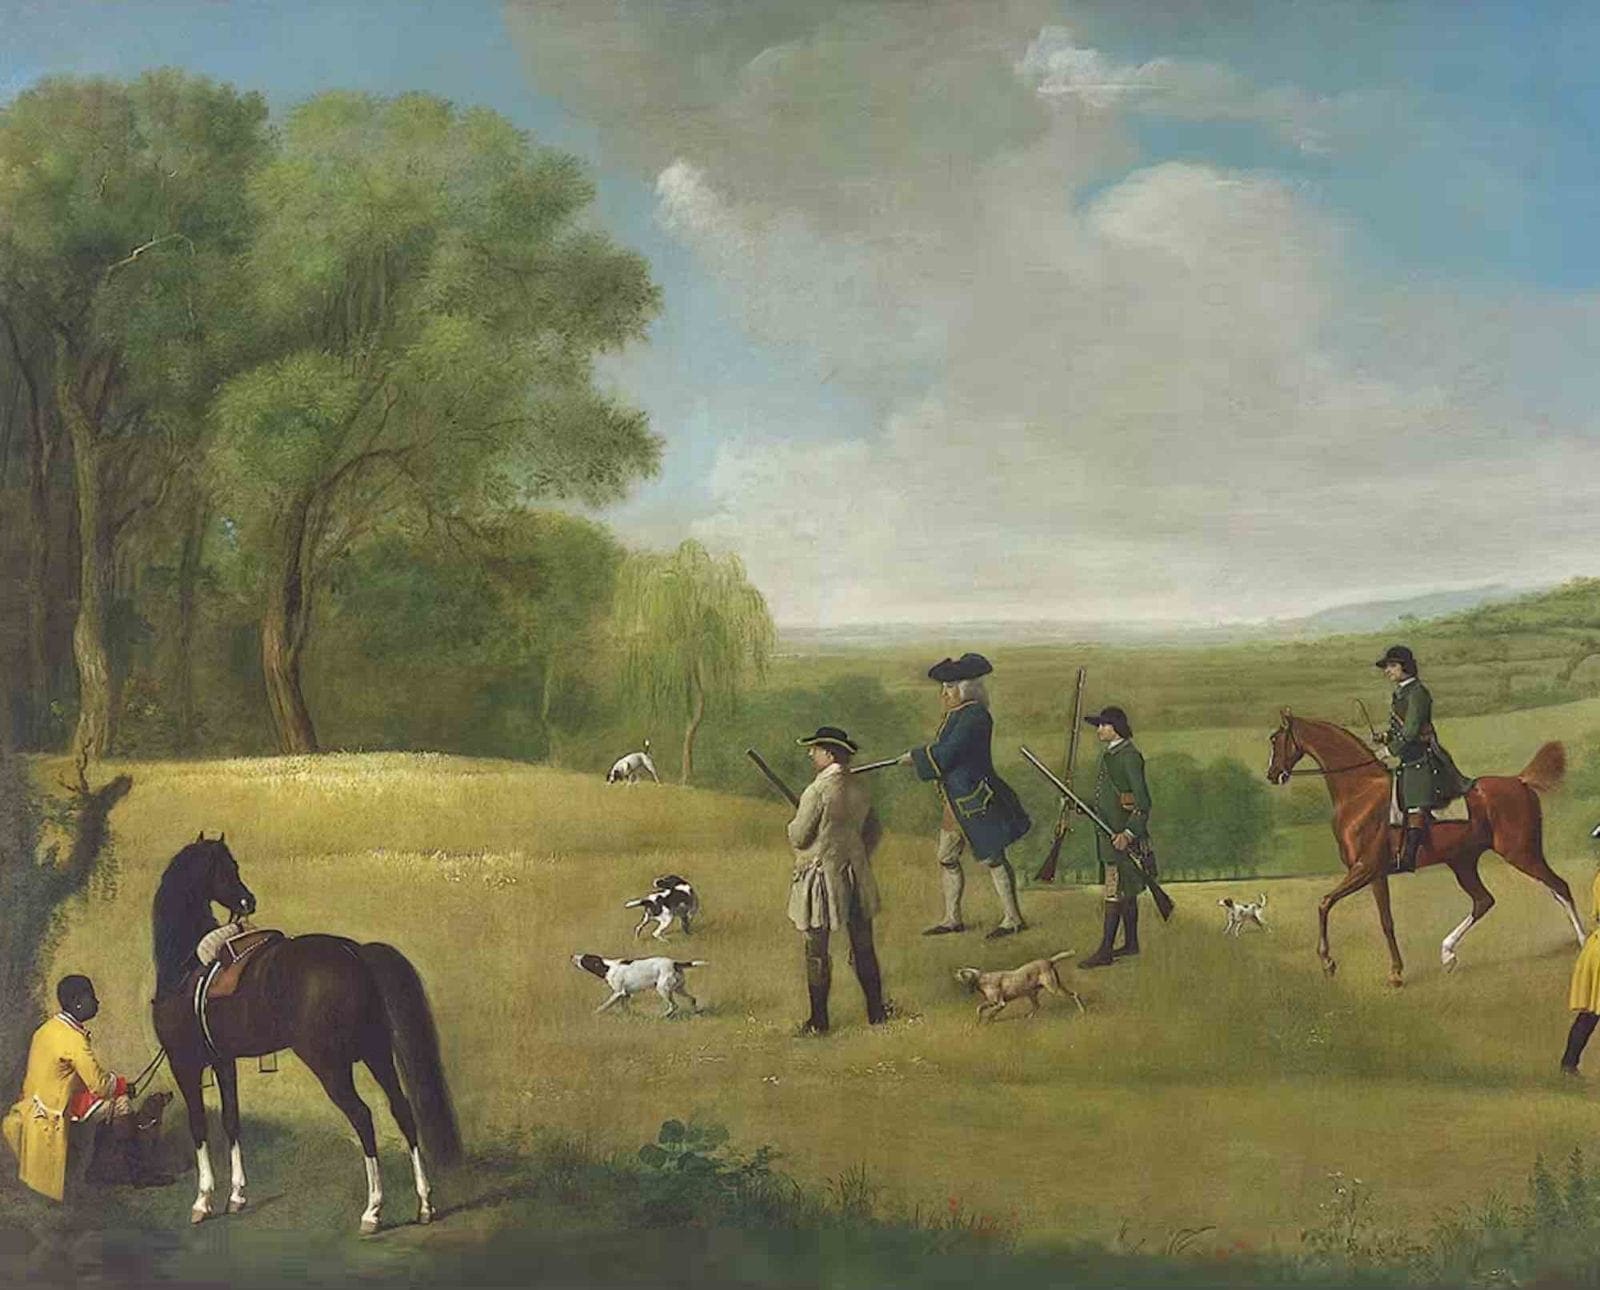 An old painting of early gun dogs used by nobility.